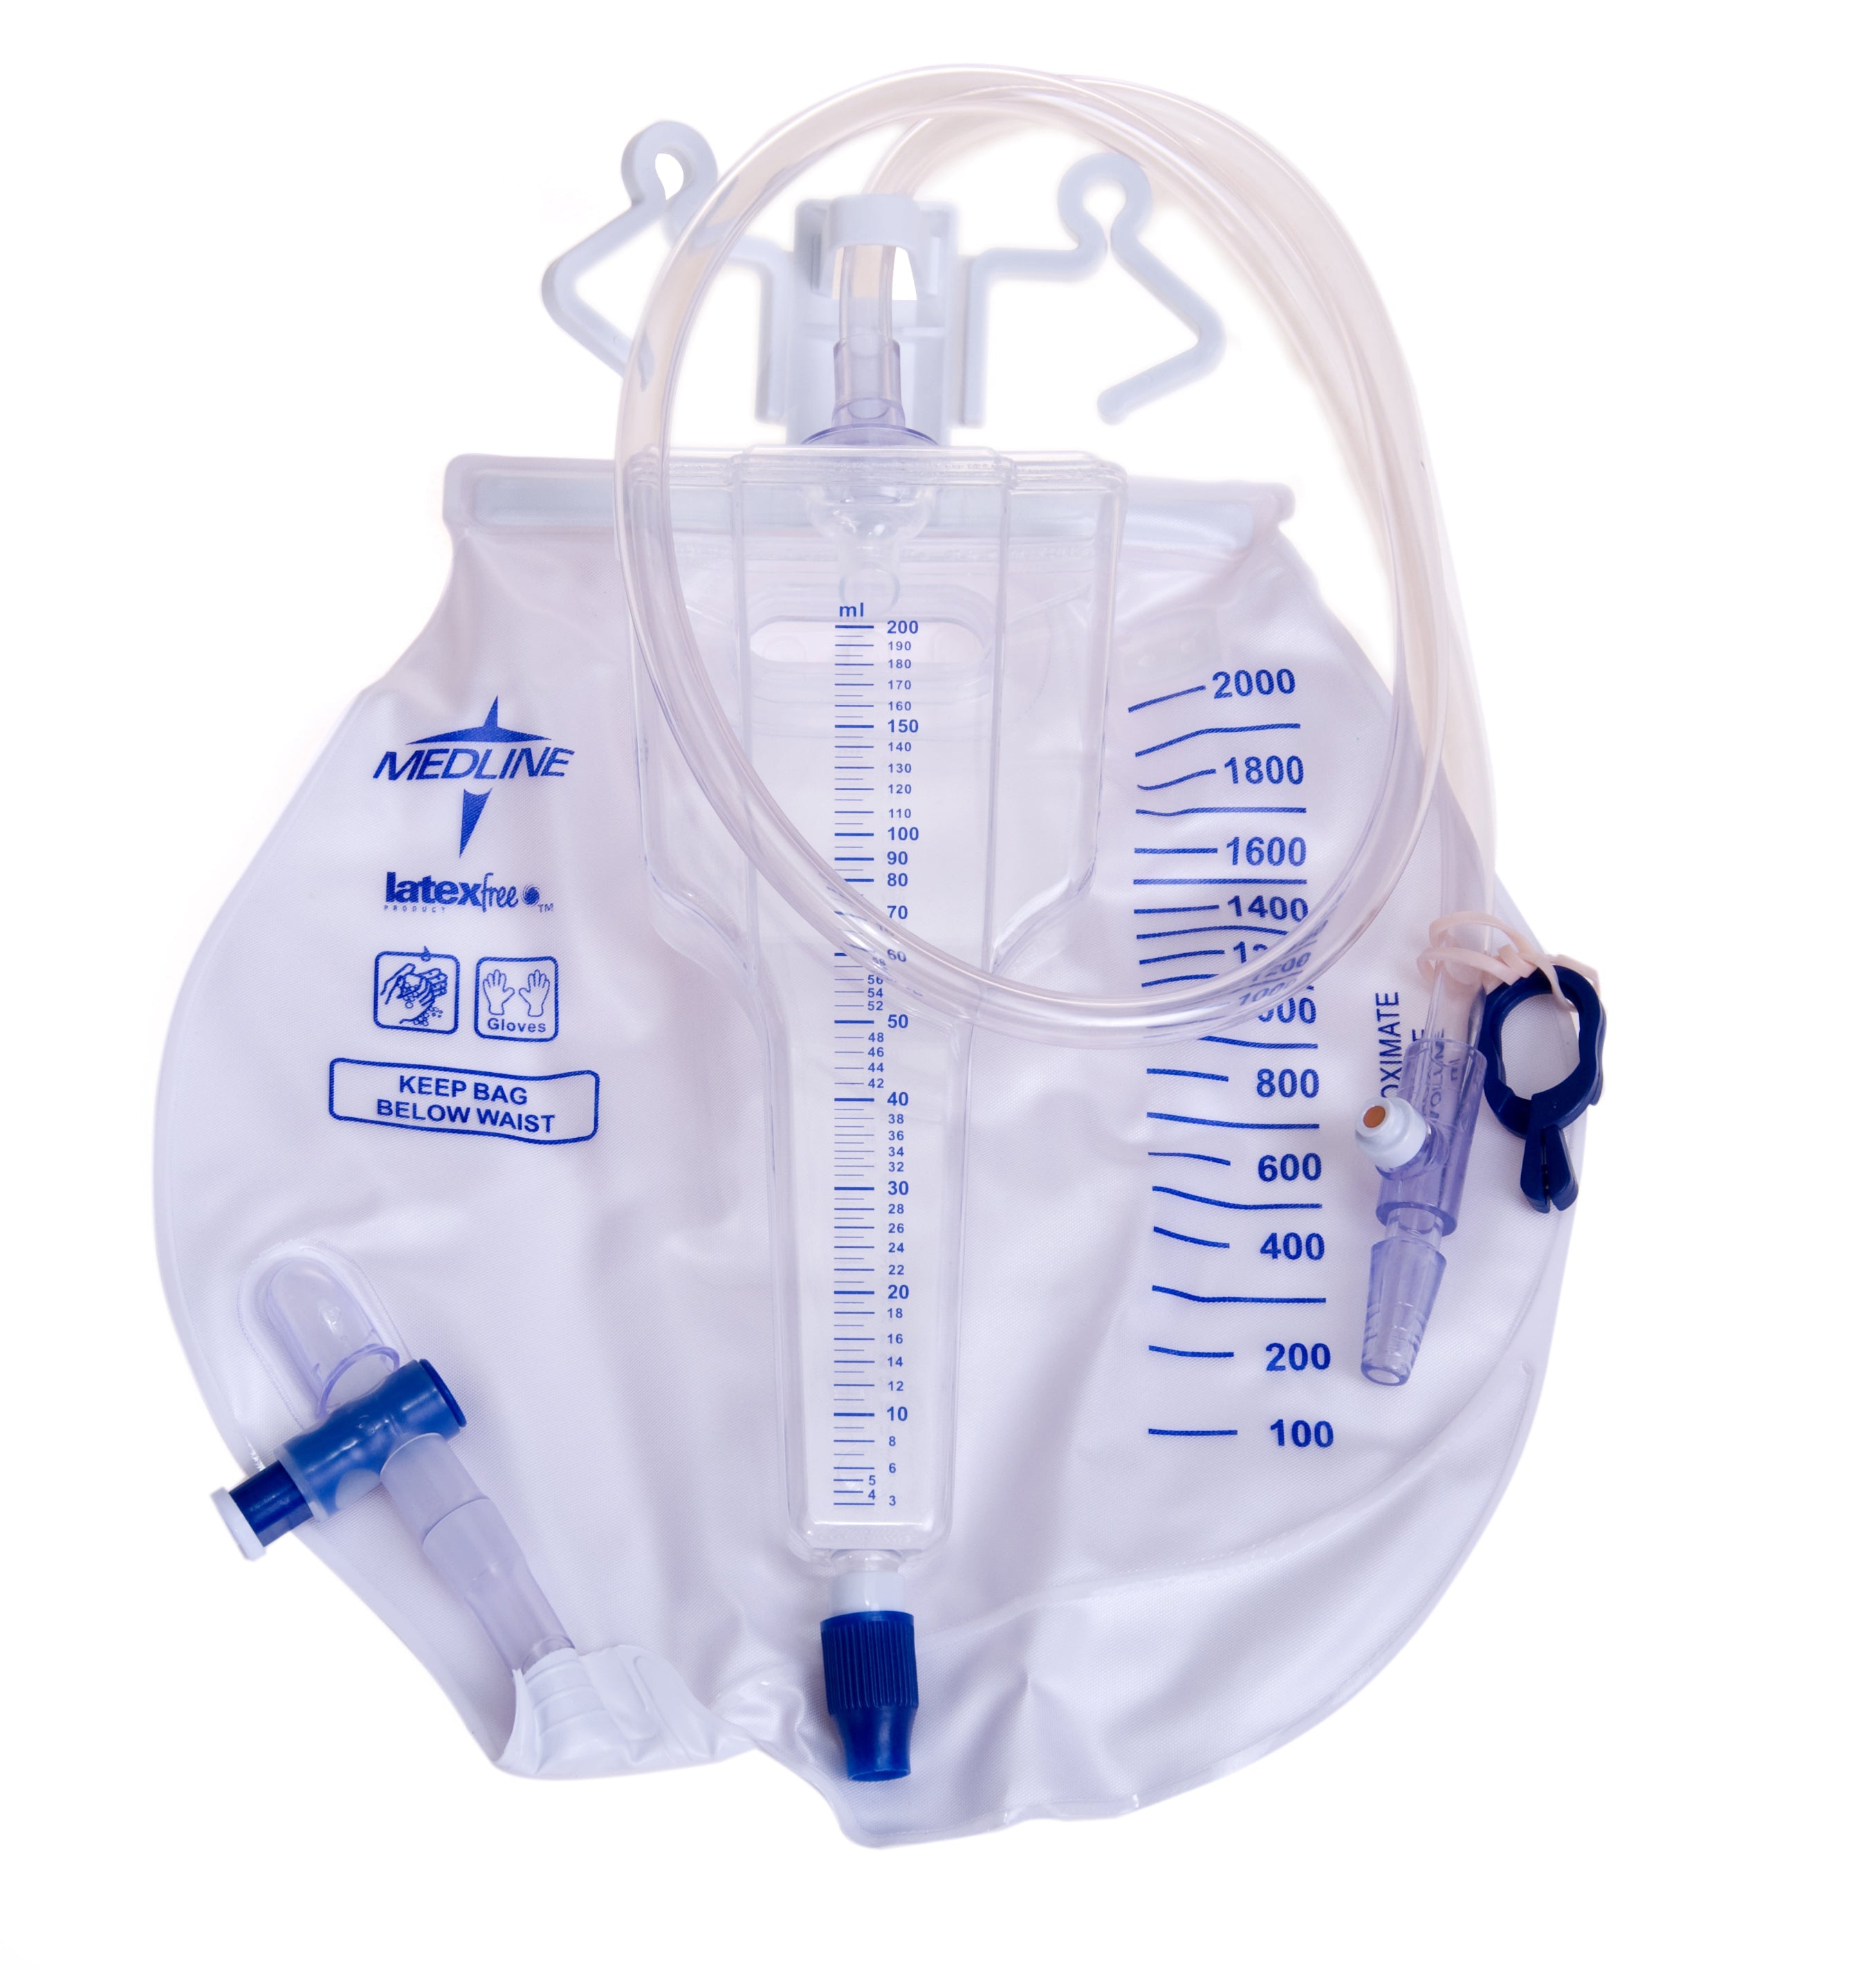 Medline Urinary Drain Bag with Anti Reflux and Metal Clamp 4000ml (1 Each)